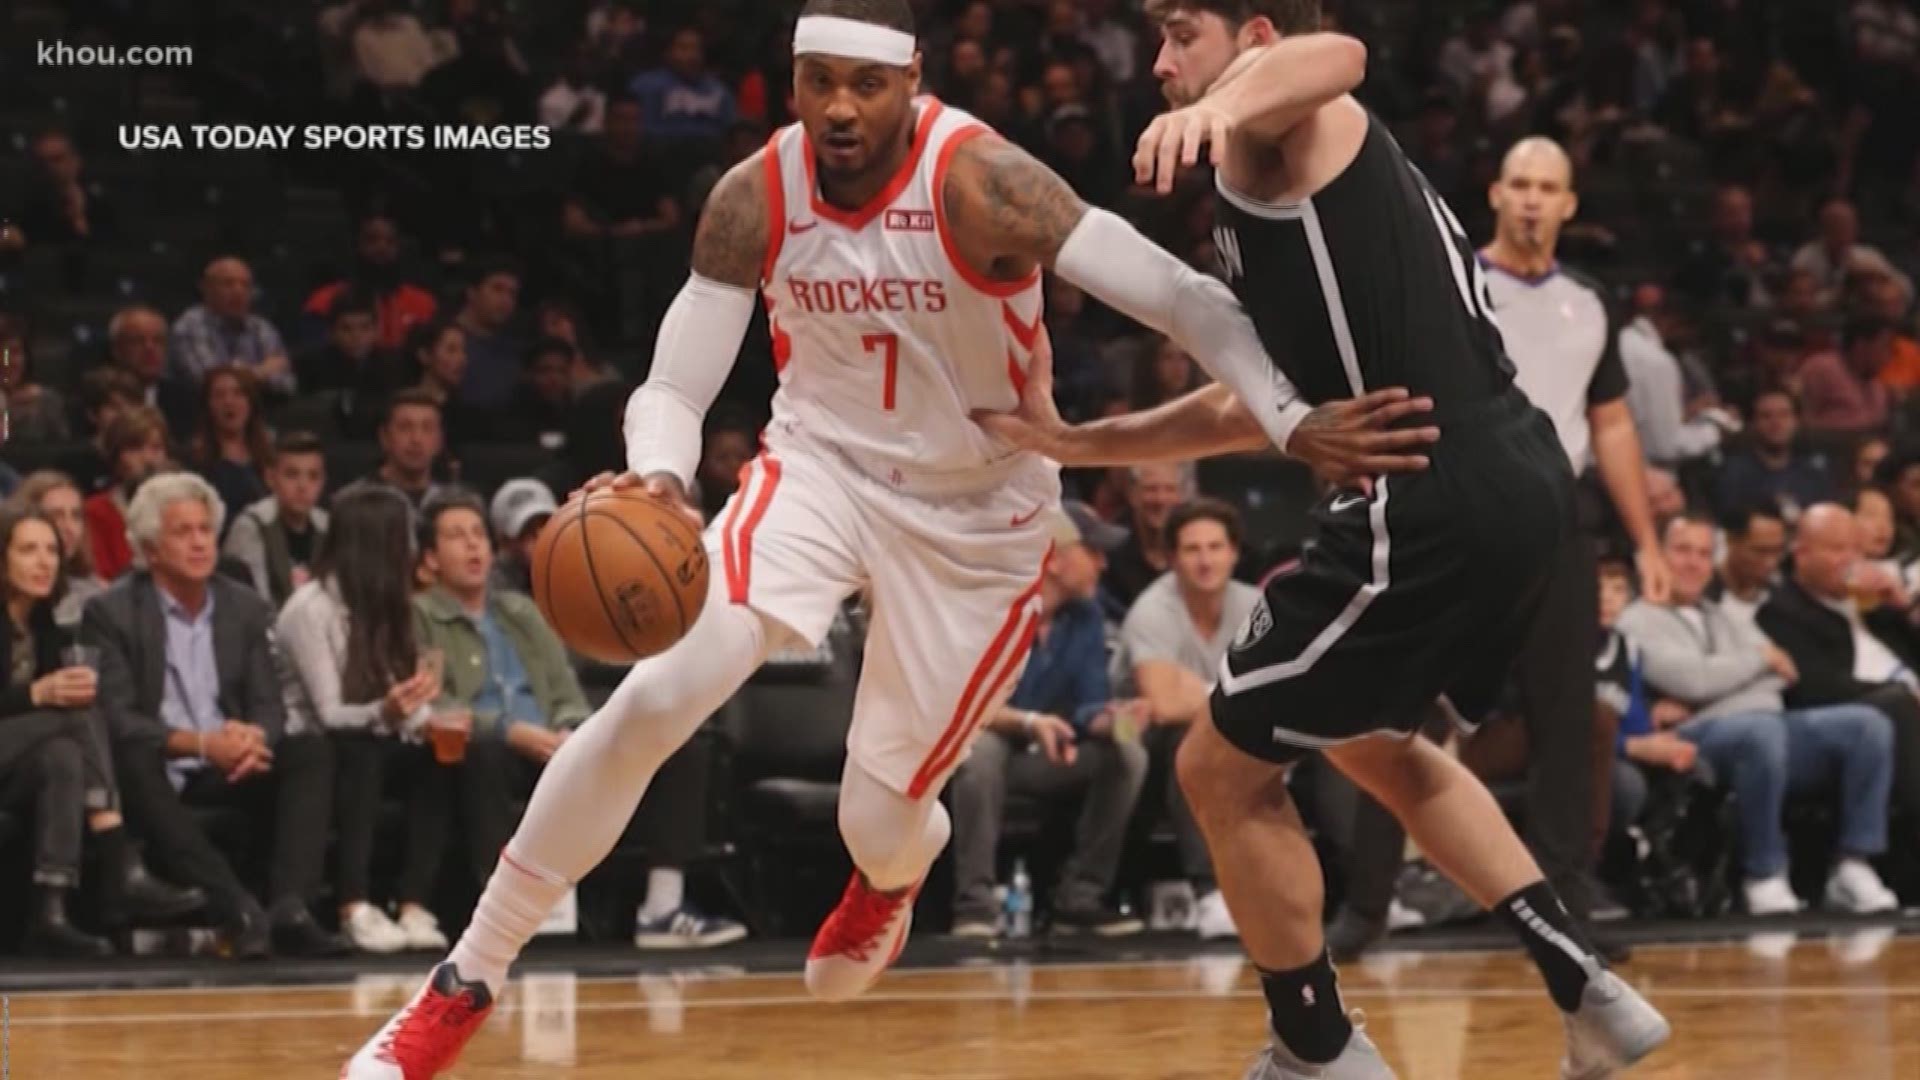 The Rockets have stumbled to a 5-7 start after appearing in the Western Conference finals last season, and Carmelo Anthony has been a target of criticism. Daryl Morey was upset that he felt Anthony had been "singled out."